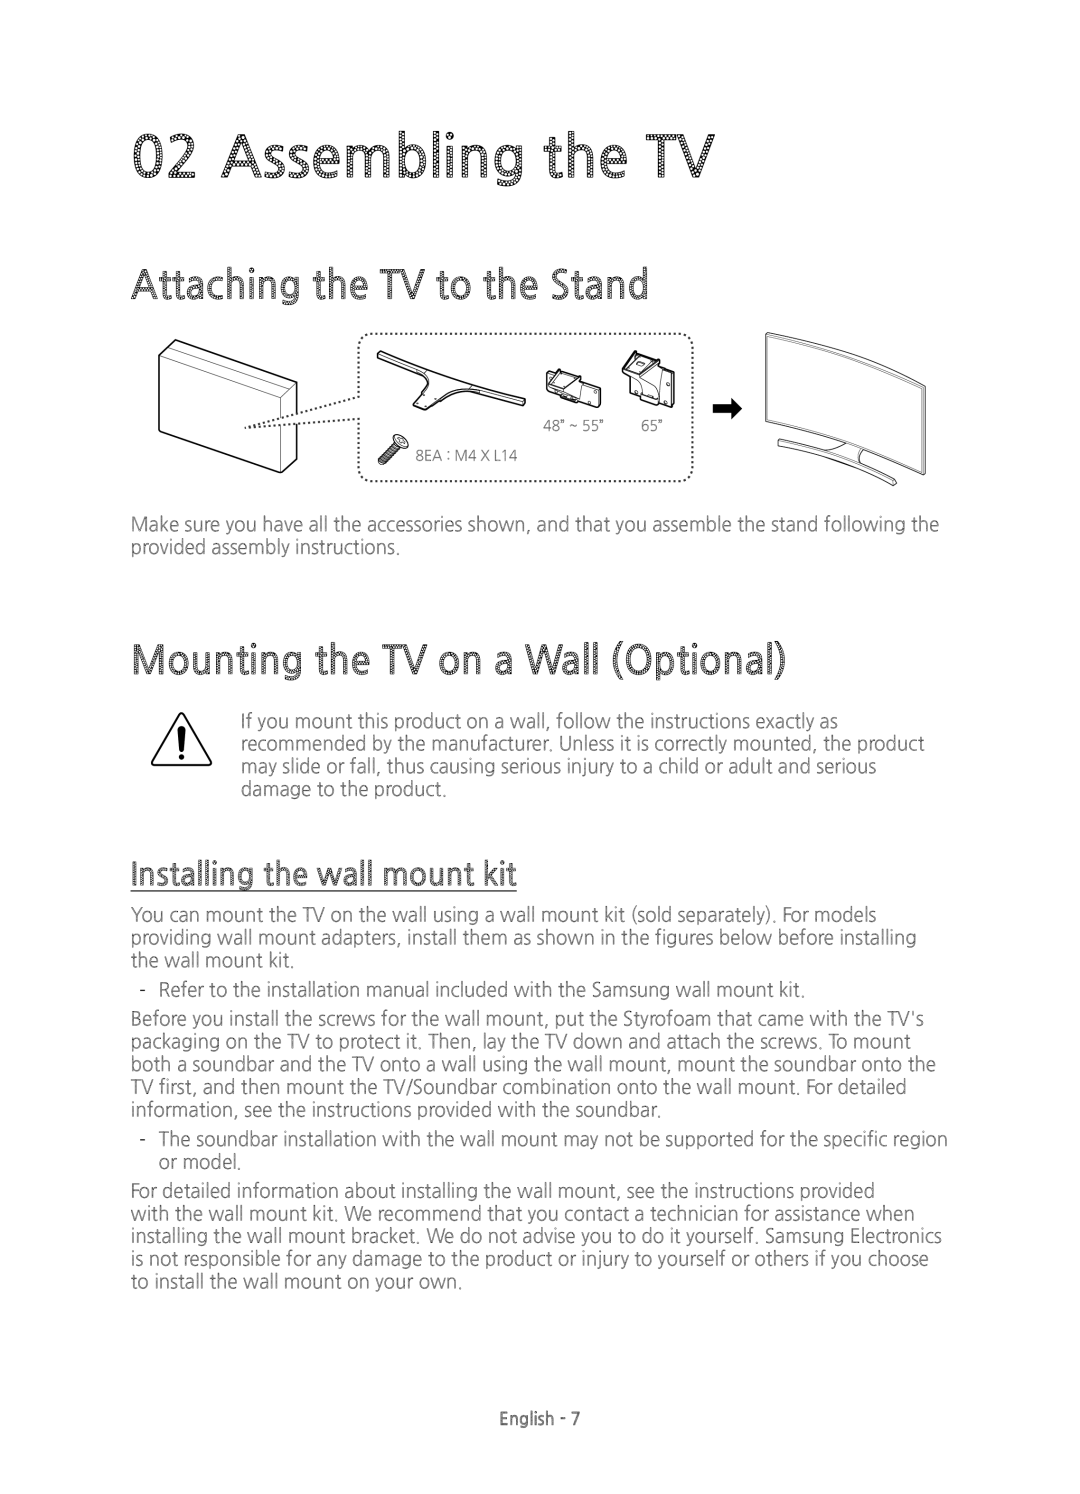 Samsung UE48JS8500TXXU manual Assembling the TV, Attaching the TV to the Stand, Mounting the TV on a Wall Optional 